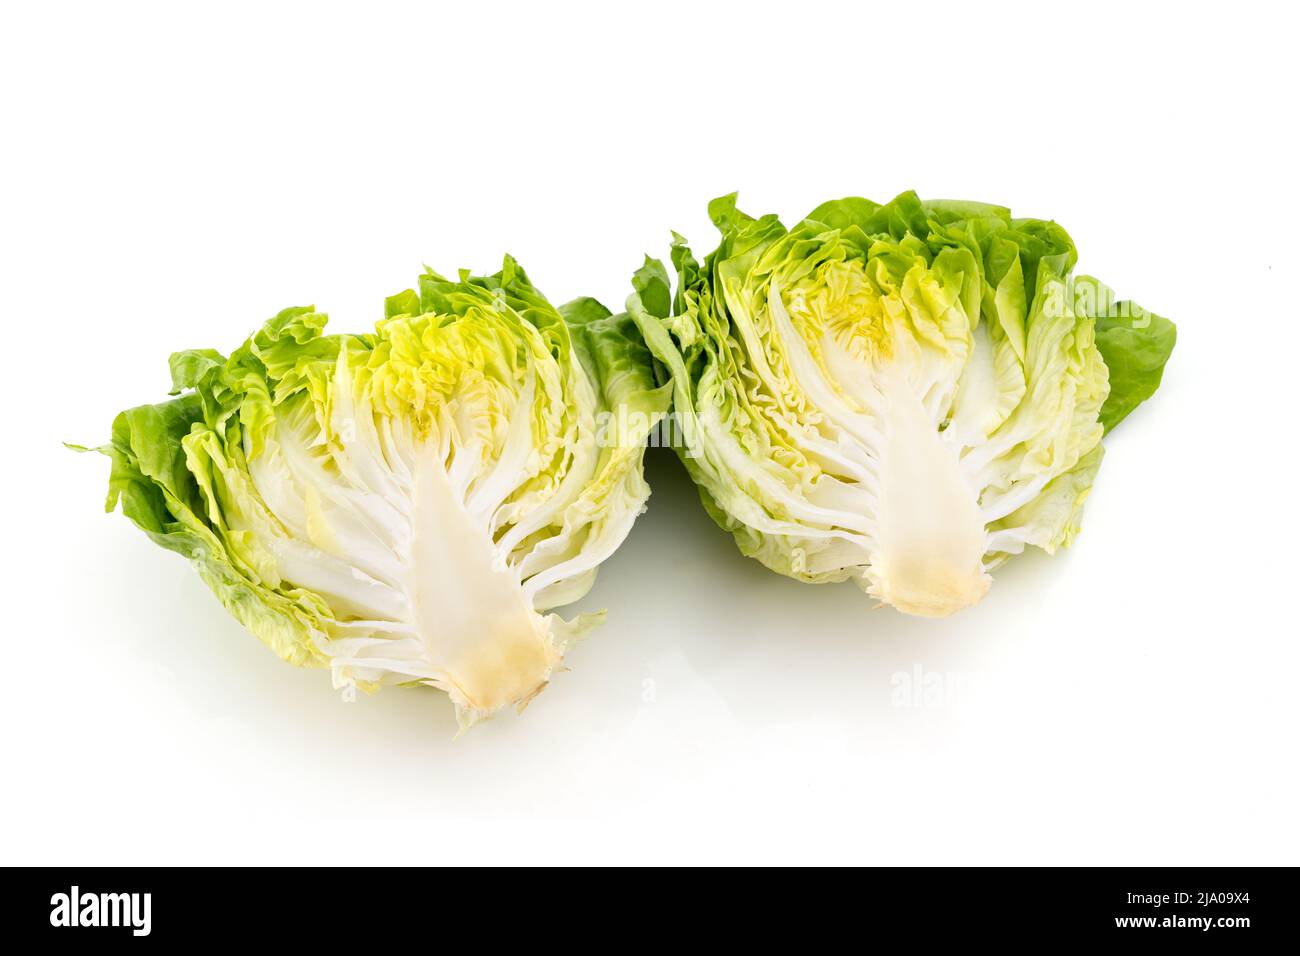 Fresh green lettuce on white background. Healthy eating concept. Vegetarian lifestyle Stock Photo